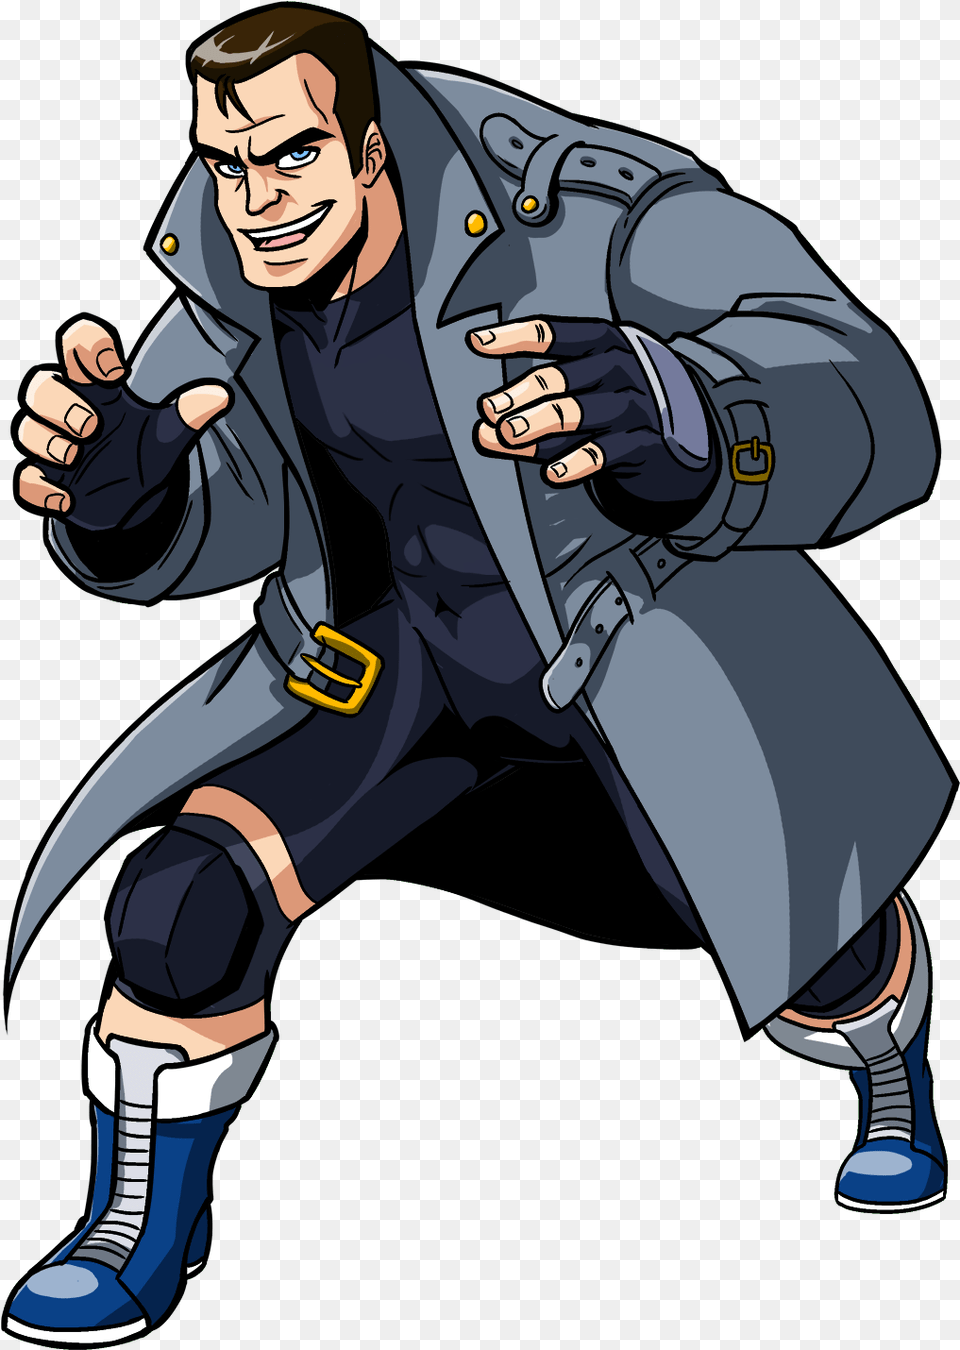 The Muscle Hustle Wikia Cartoon, Publication, Book, Clothing, Coat Png Image